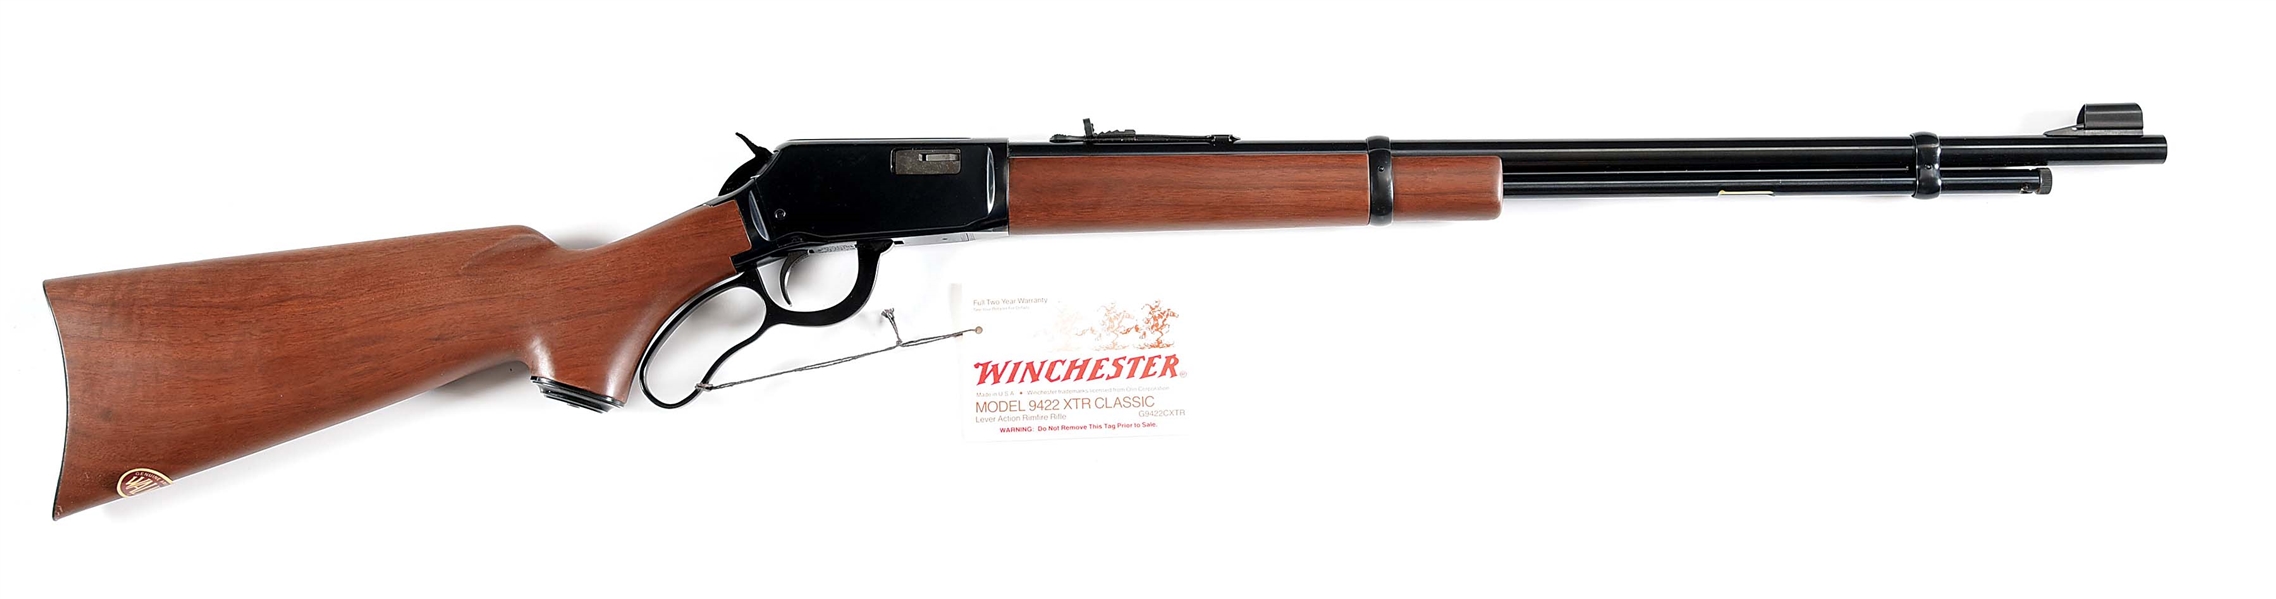 (M) WINCHESTER 9422 XTR CLASSIC LEVER ACTION RIFLE.